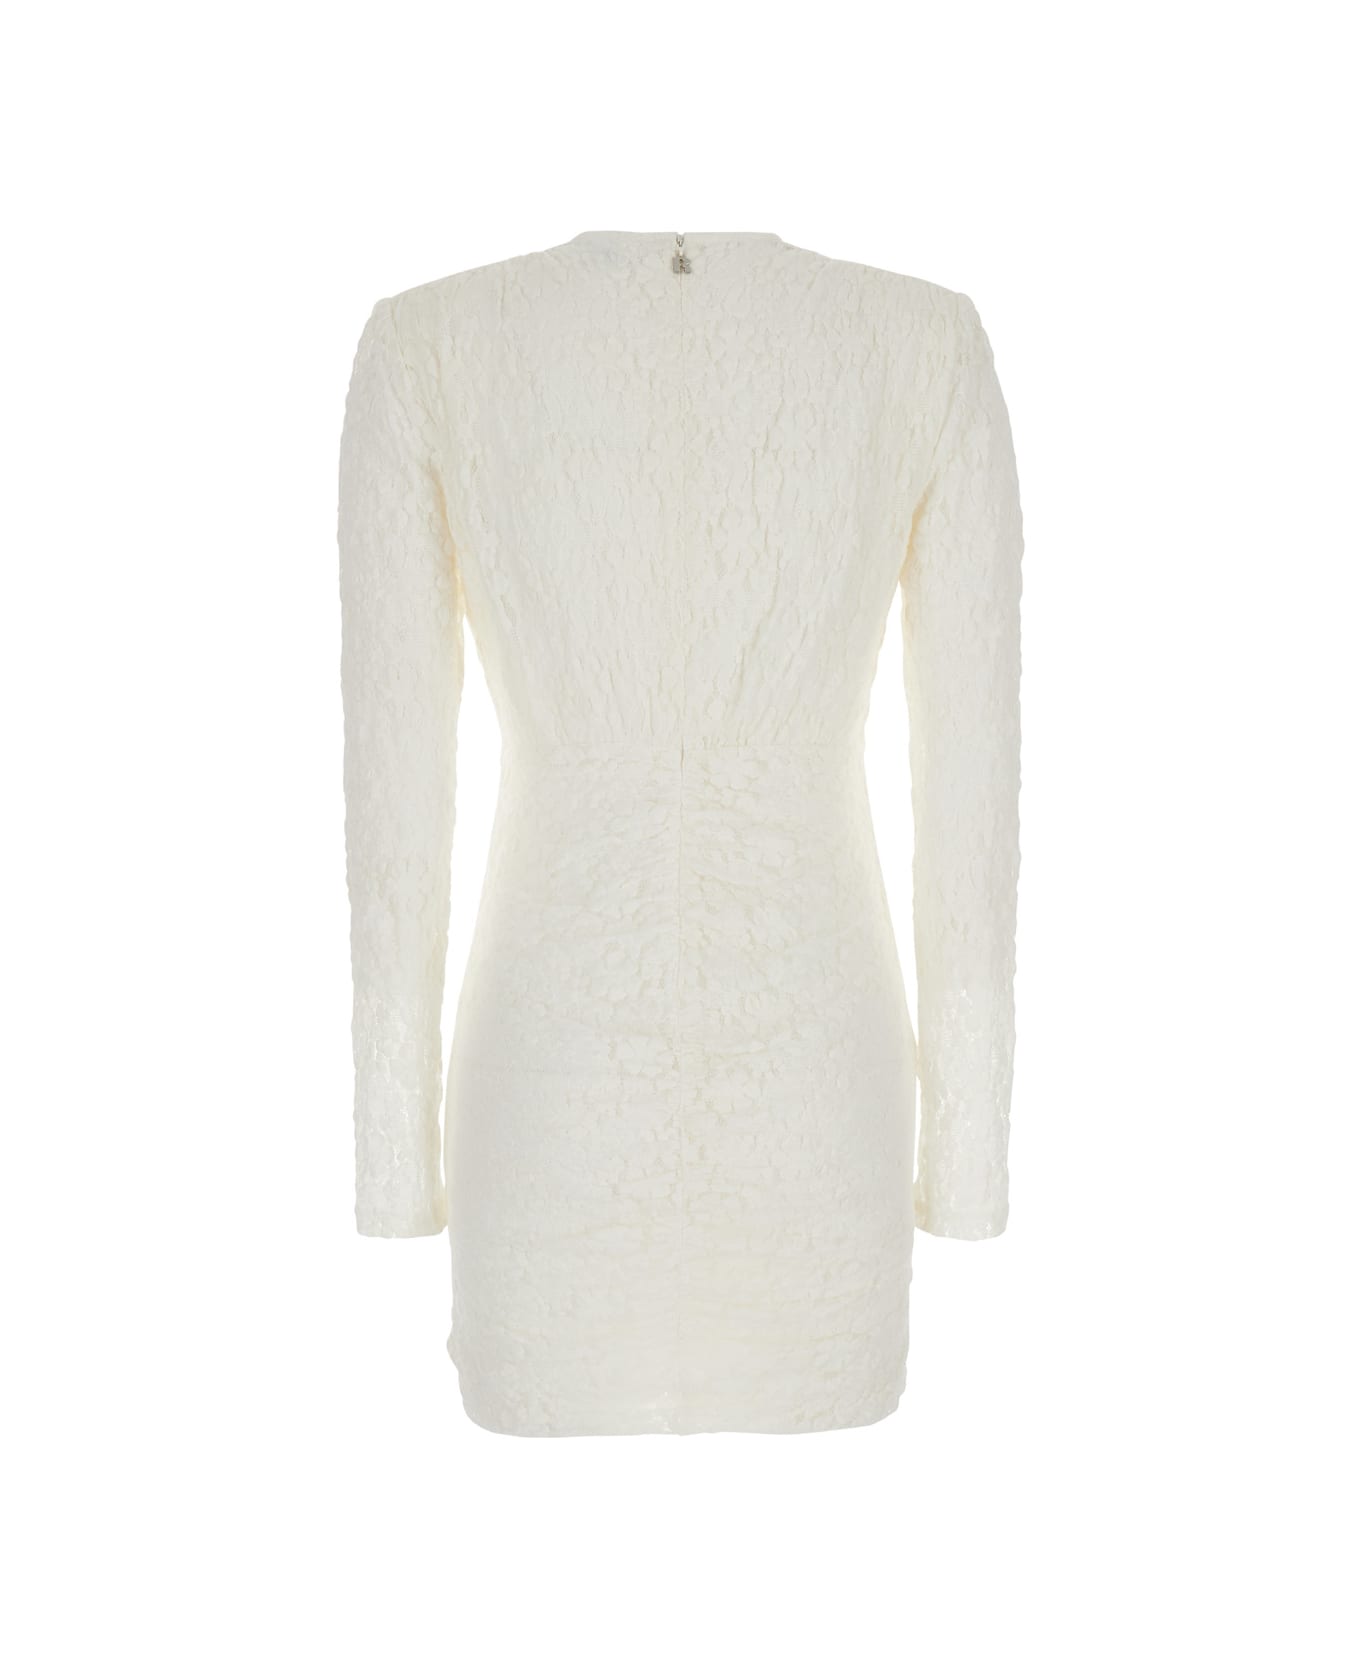 Rotate by Birger Christensen Mini White Dress With Rose Patch In Lace Woman - Egret